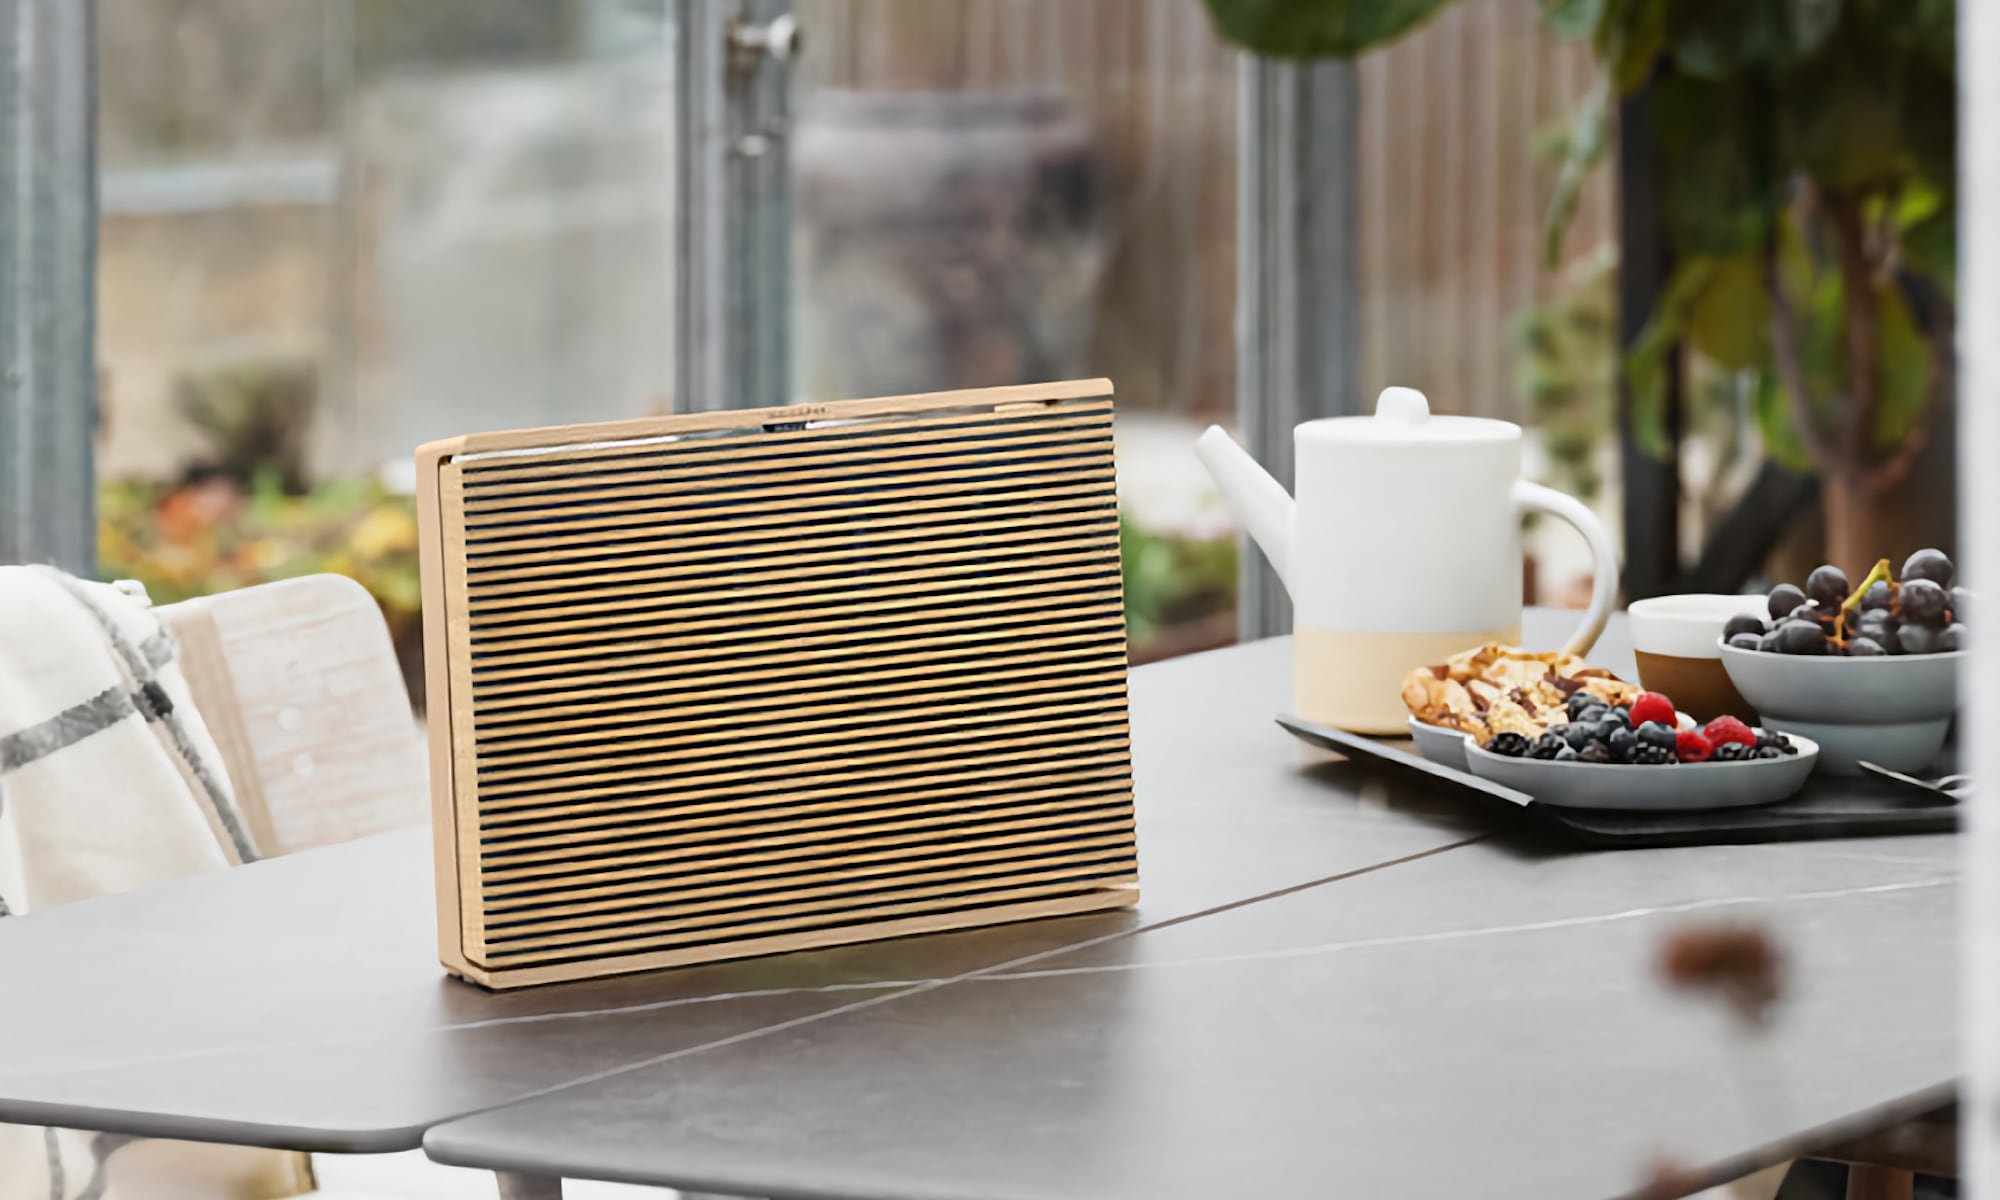 B&O’s Beosound Level connected speaker is built to last